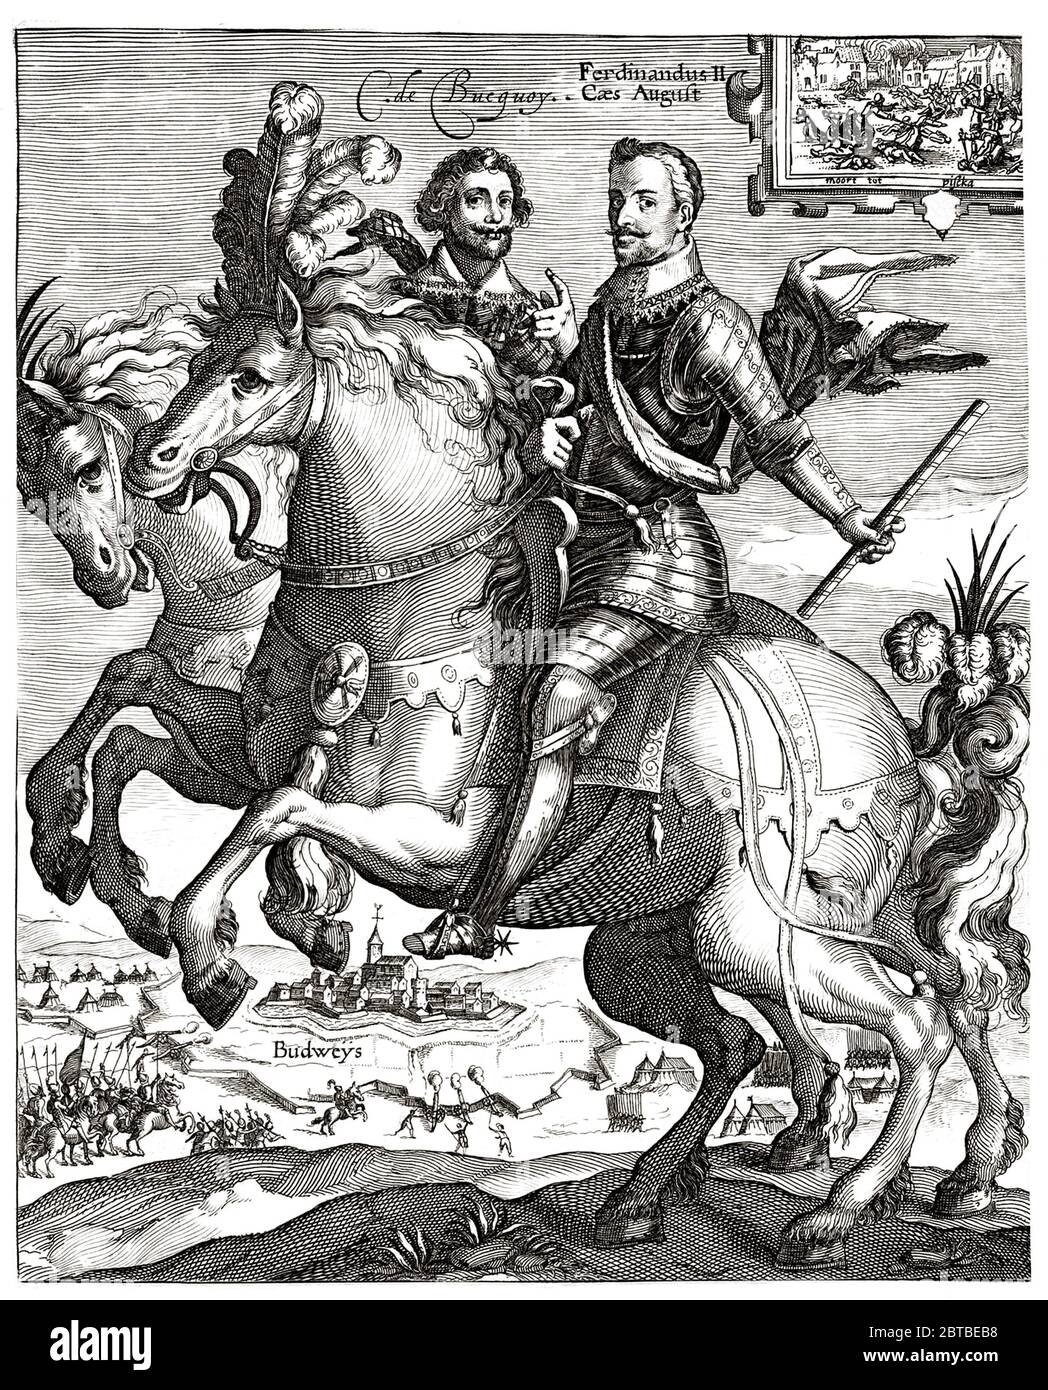 1606 ca , GERMANY : The Count CHARLES Bonaventura de LONGUEVAL DE BUCQUOY ( Bonaventure , 1571 - 1621 ) with Captain General Marquis AMBROGIO SPINOLA de Los Balbases ( Ambrosio , 1569 - 1630 ). Portrair by undentified engraver after Crijspin Van de Passe ( 1564 - 1637 ), pubblished in 1606 ca, for mistake Spinola is renamed like german King Ferdinand II Habsburg ( 1578 - 1637 ). De Bucquoy was a French born in Arras , military commander who fouught for Spanish Netherlands during the Eighty Years War and for the Holy Roman Empire during the Thirty Years War . - KAREL - CARLOS --- ARCHIVIO GBB Stock Photo